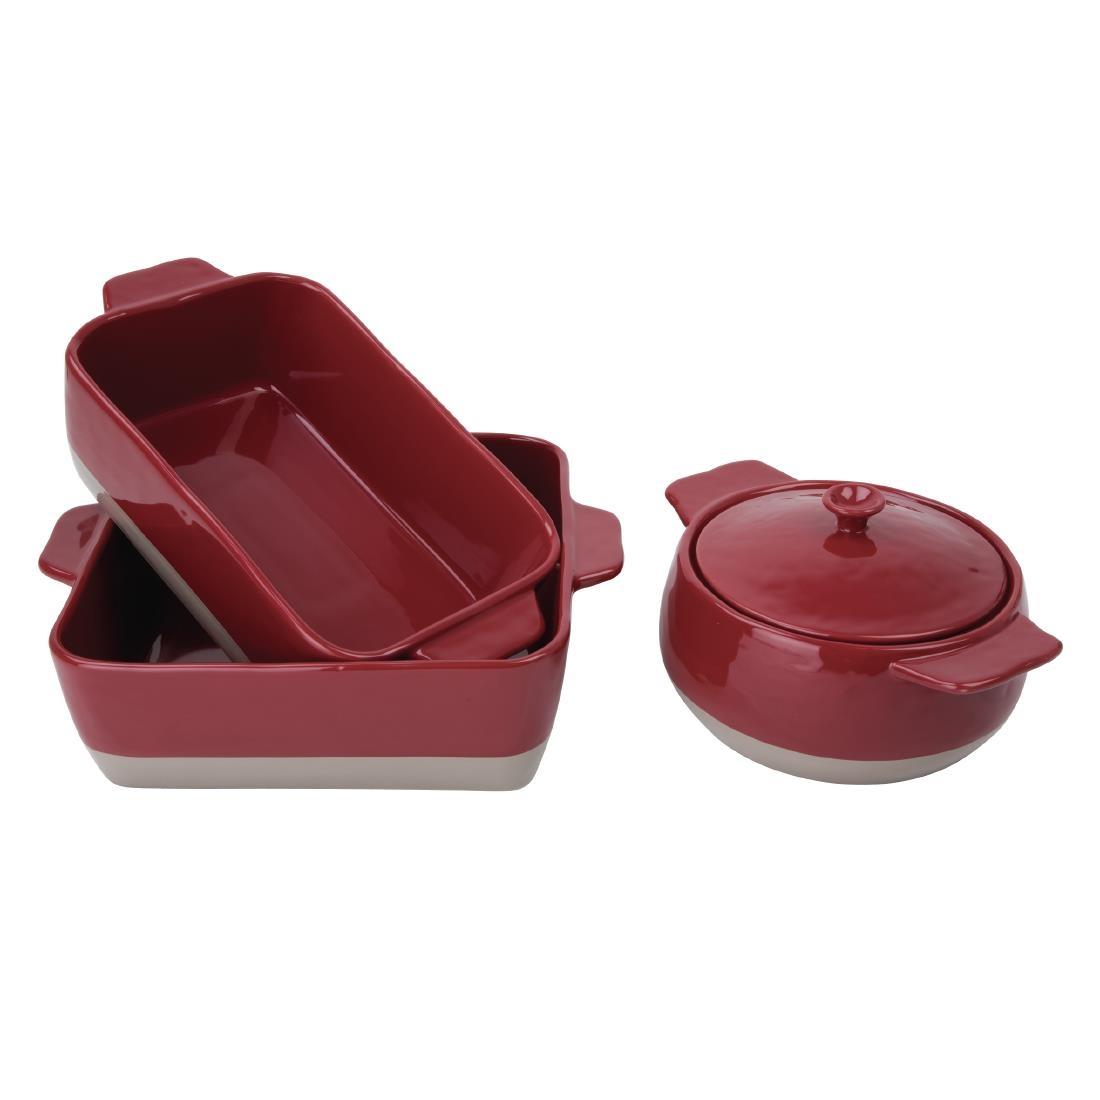 Olympia Red And Taupe Ceramic Roasting Dish 4.2Ltr - DB527  - 3